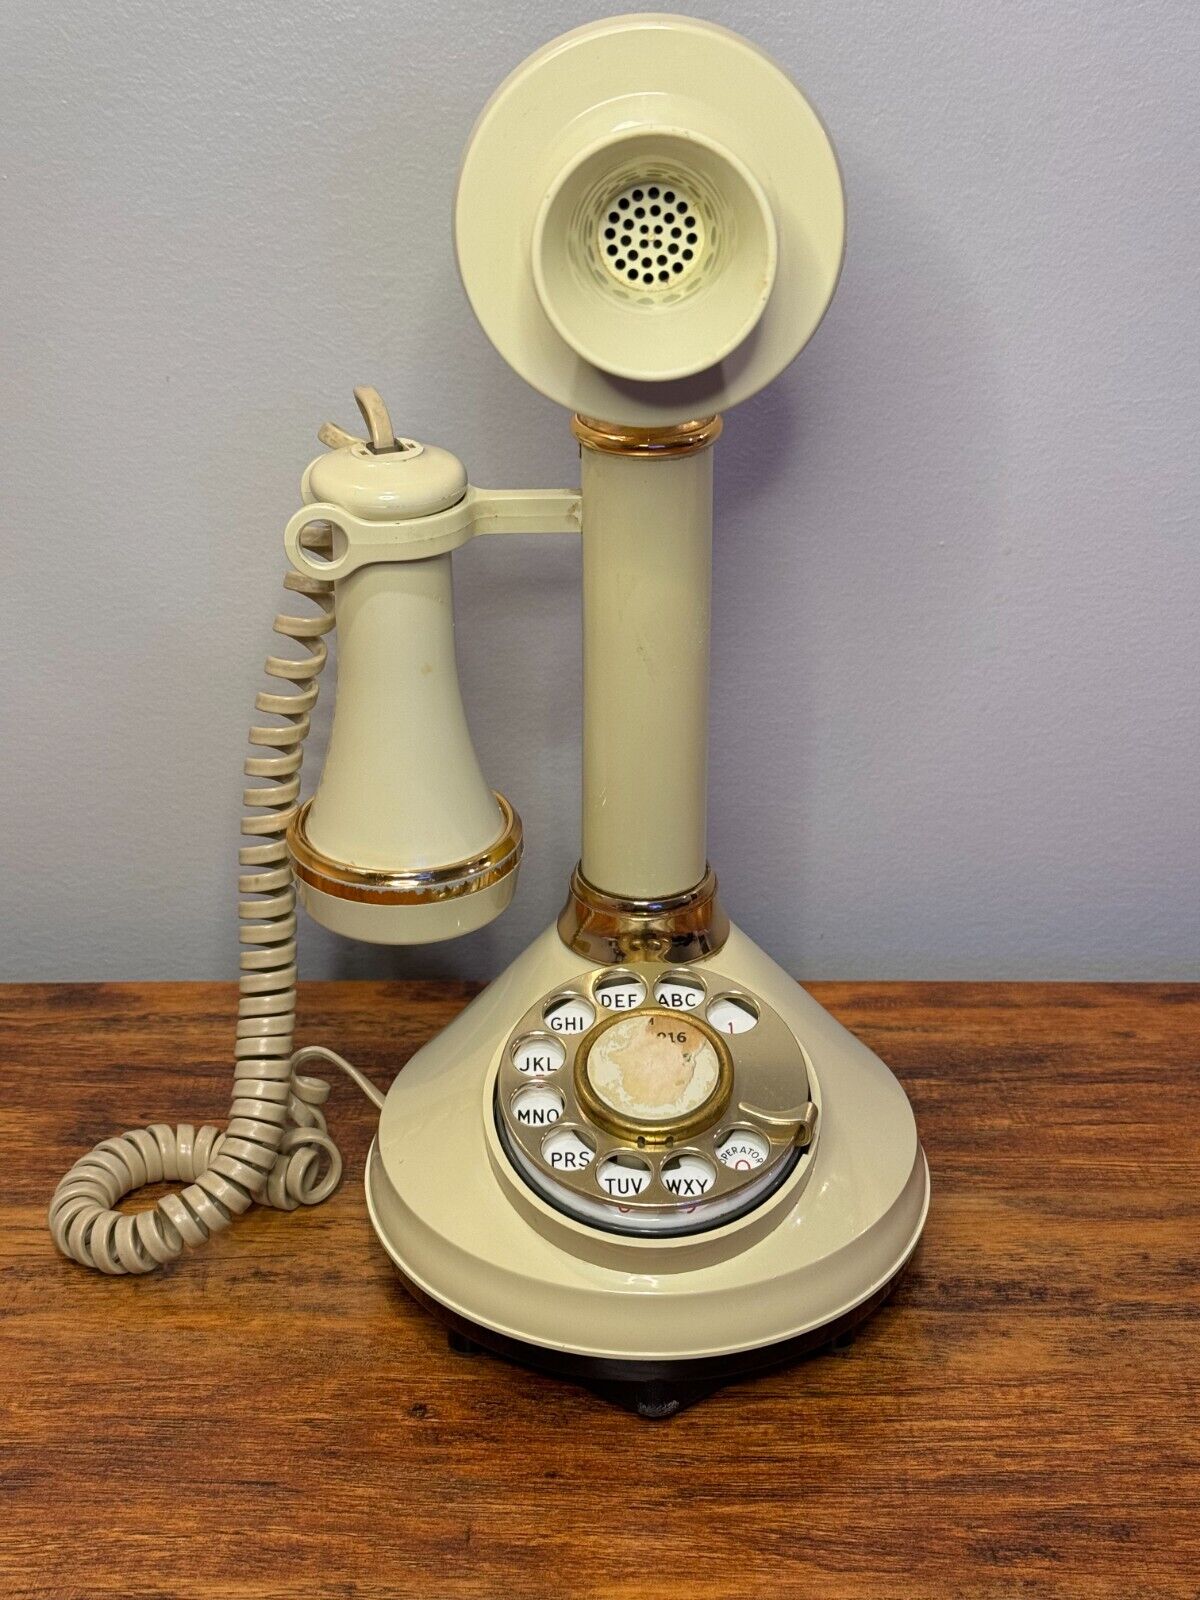 VINTAGE CANDLESTICK TELEPHONE Rotary Dial American Telecommunications 1973 Home